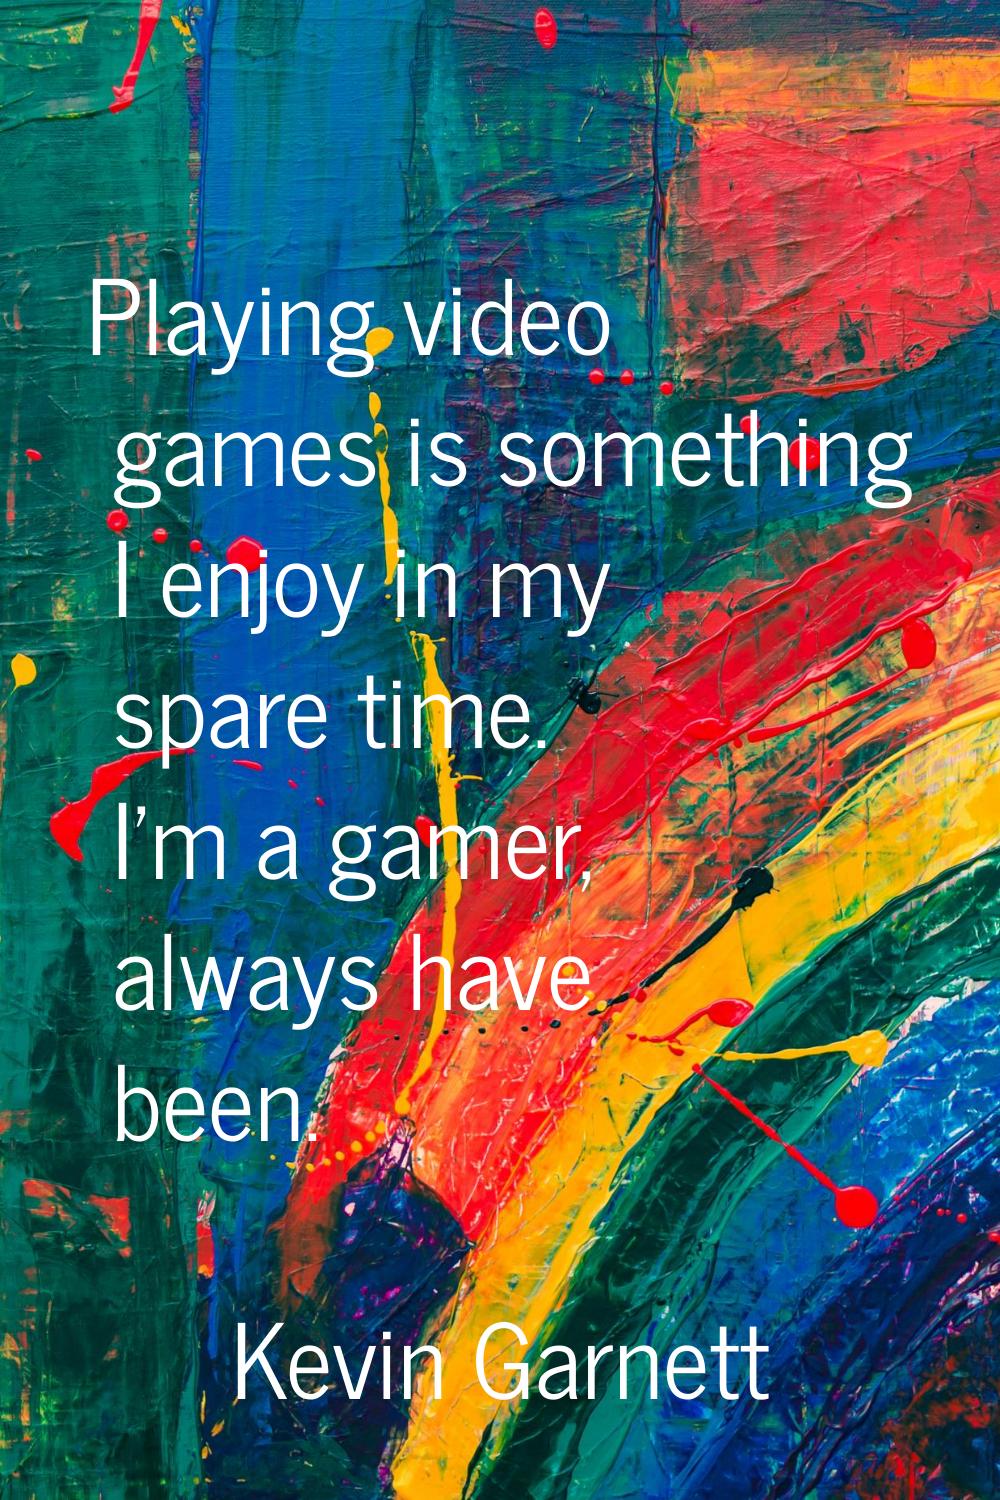 Playing video games is something I enjoy in my spare time. I'm a gamer, always have been.